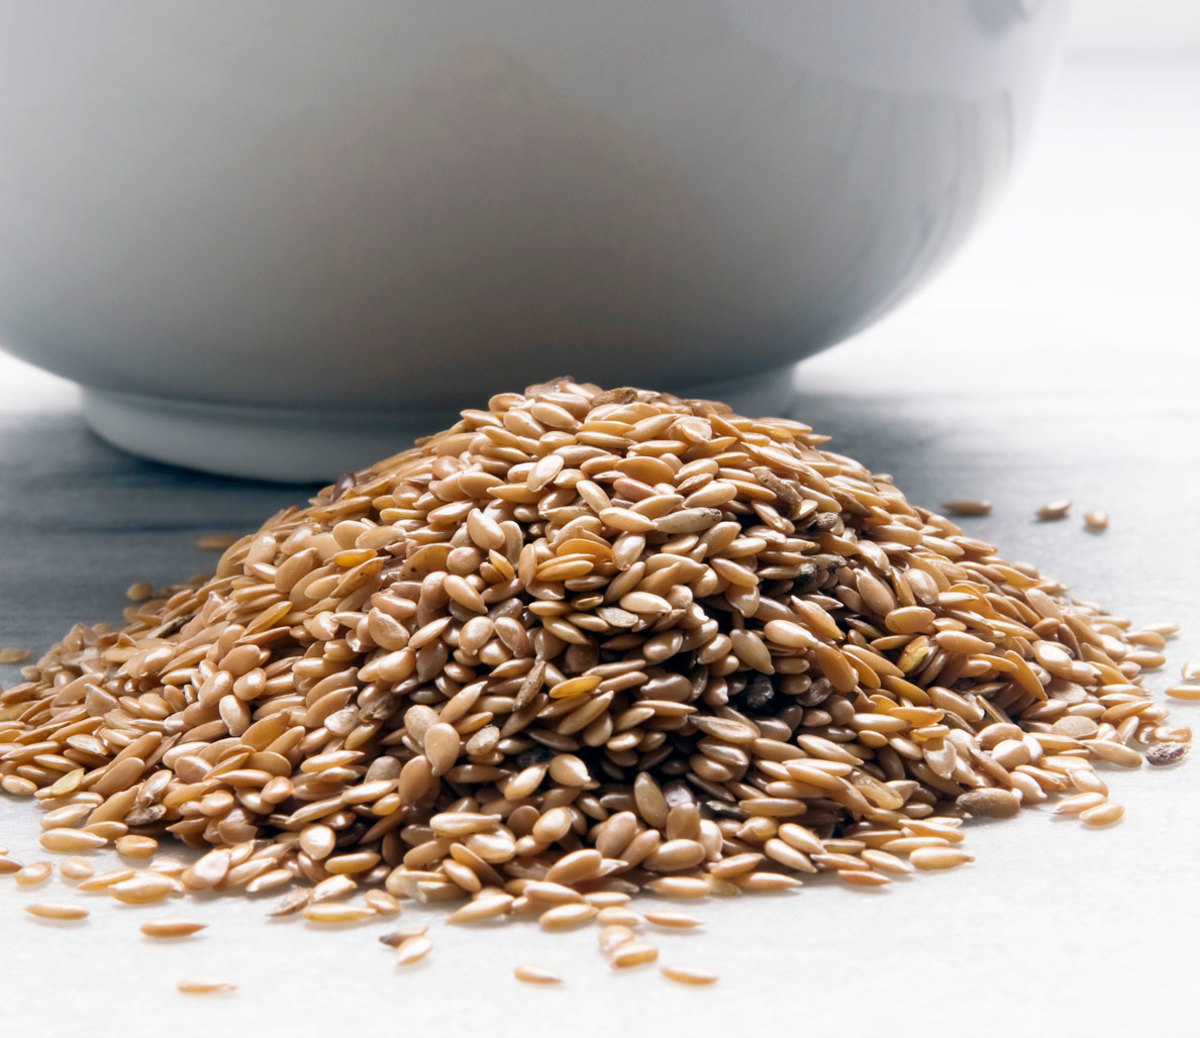 10 Ways to Eat and Cook Flax Seeds %%sep%% %%sitename%% - Men's Journal